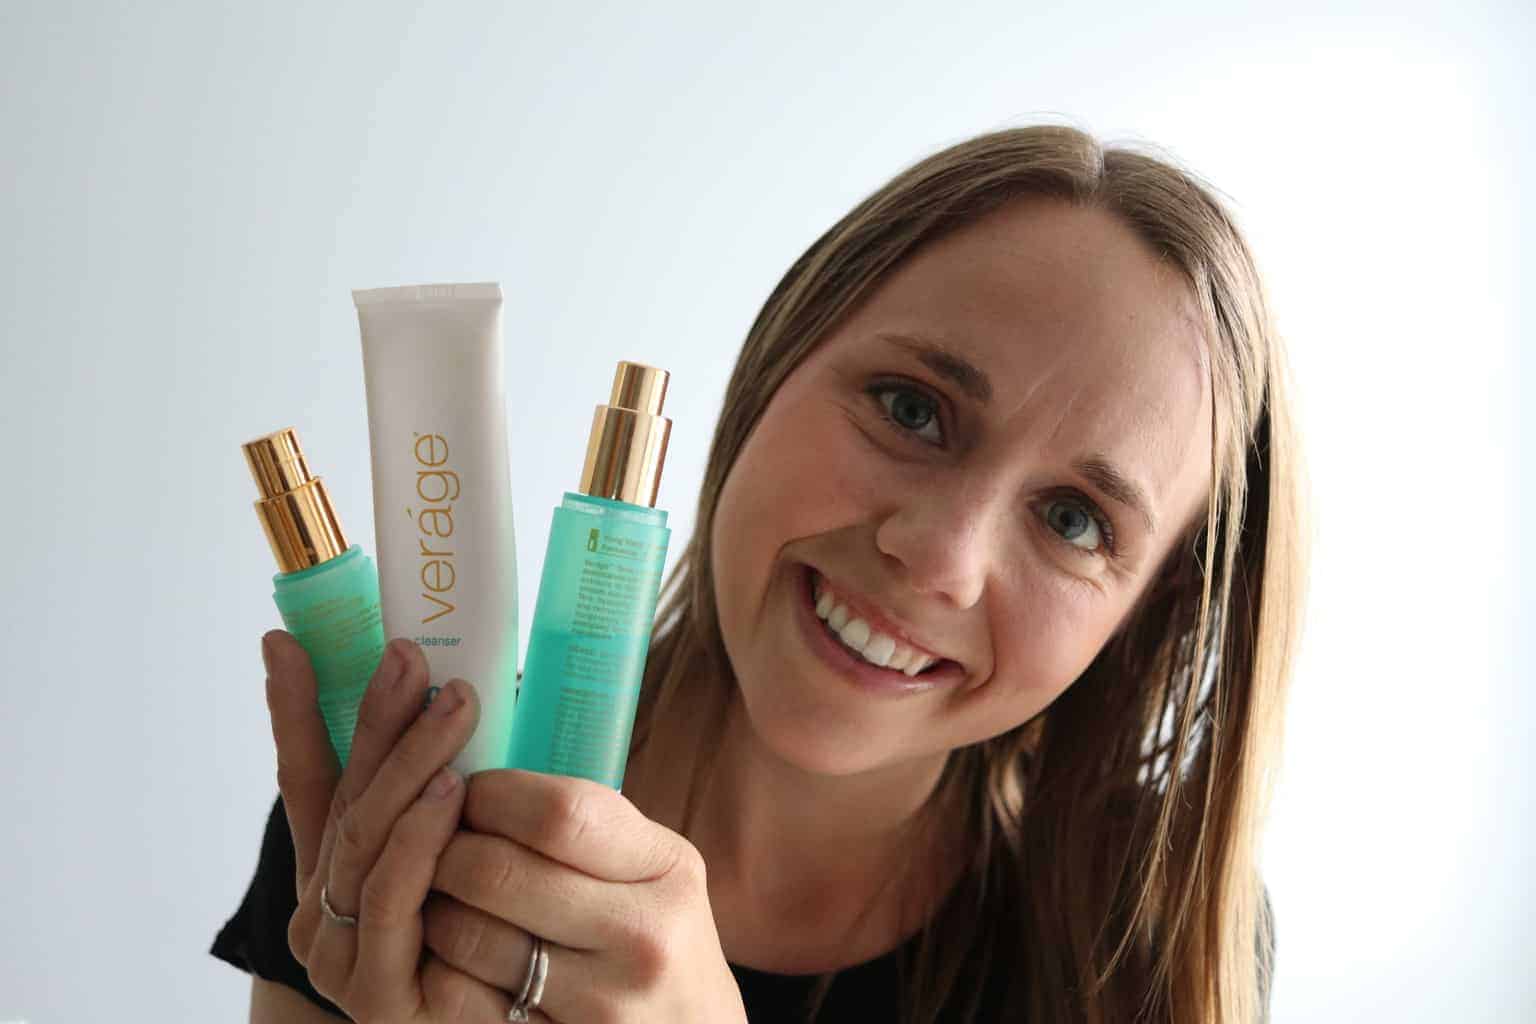 A women holding doTERRA verage skin care line natural products.